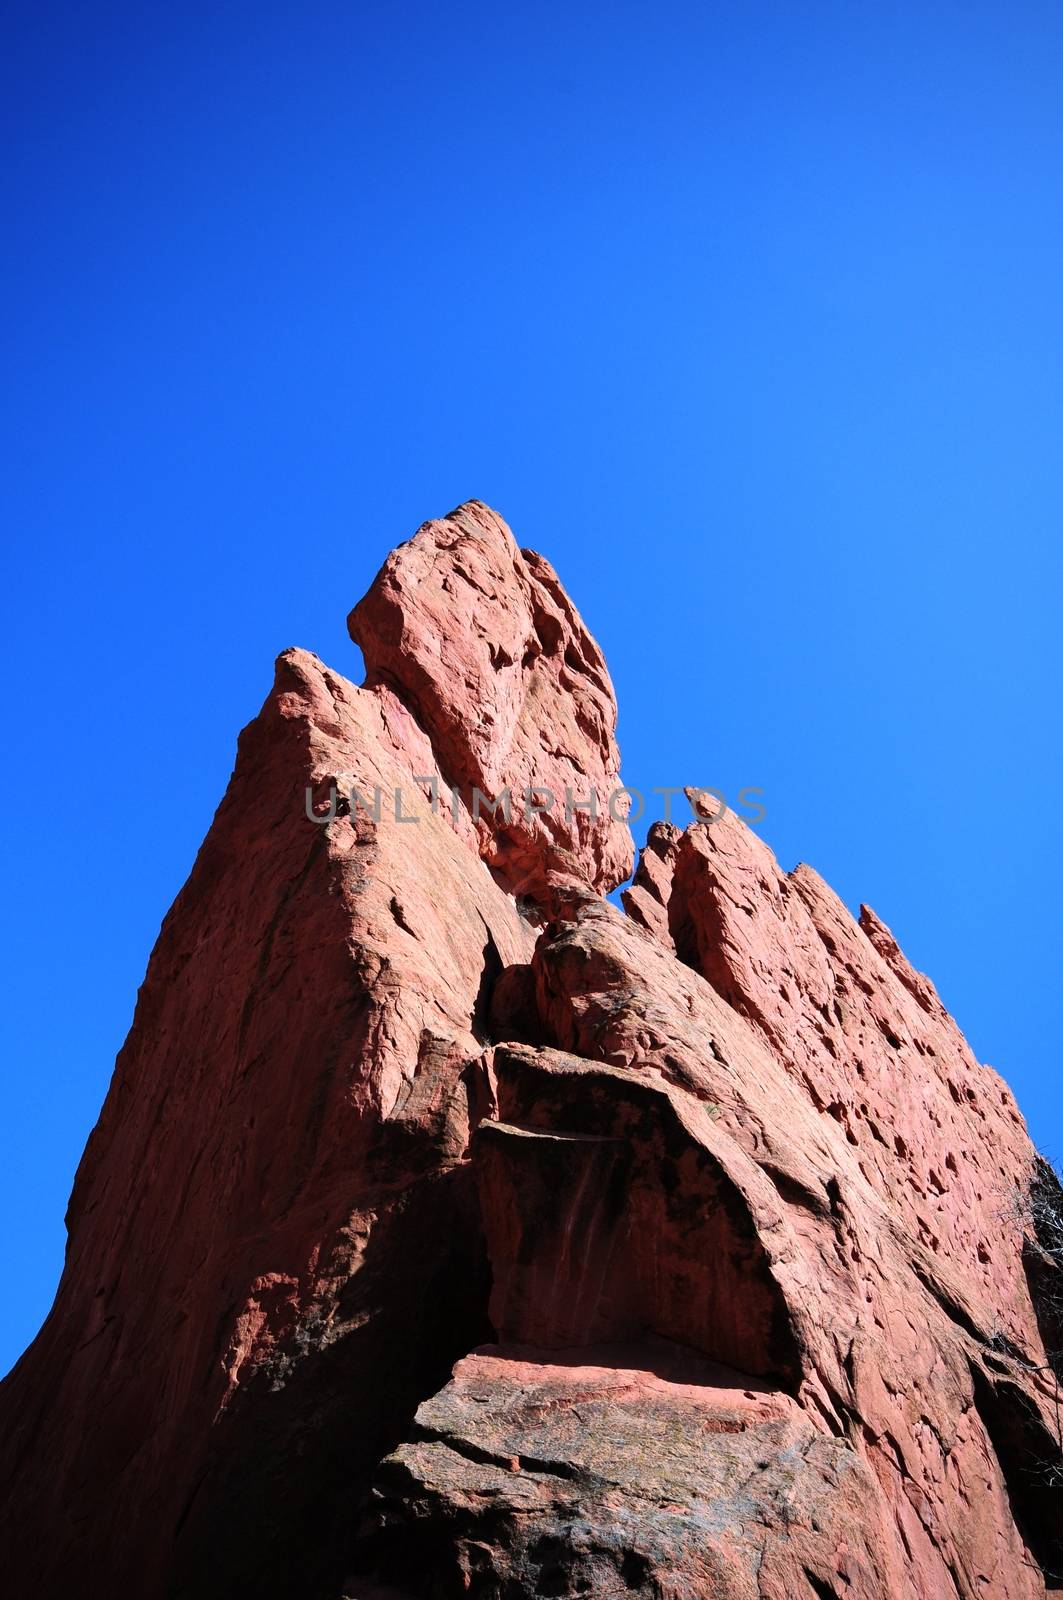 Rock Summit - Red Rocks in the Garden of the Gods, Colorado Springs, CO